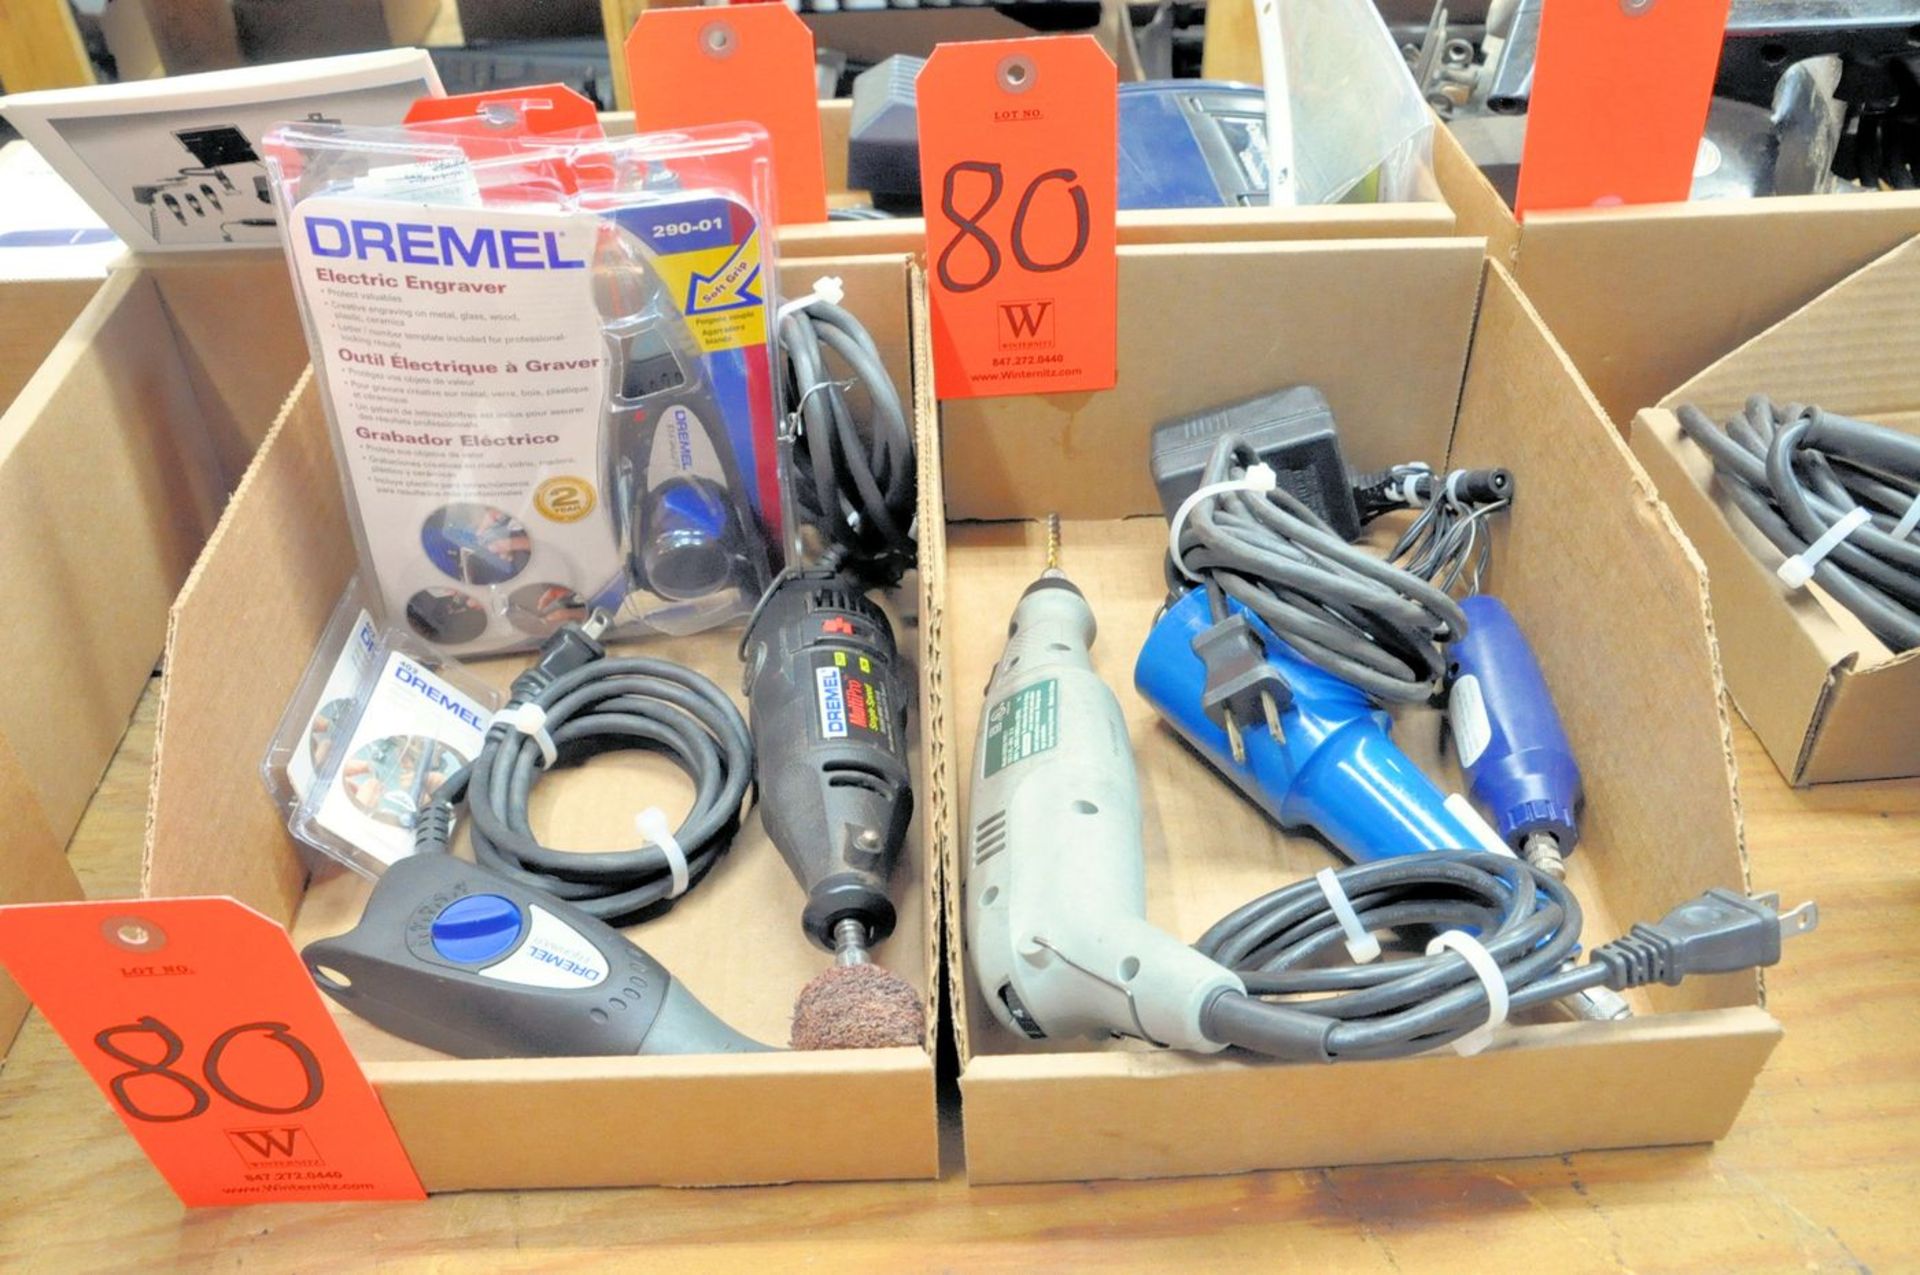 Lot - Dremel Electric Engravers with Electric Rotary Tools in (2) Boxes and (1) Case